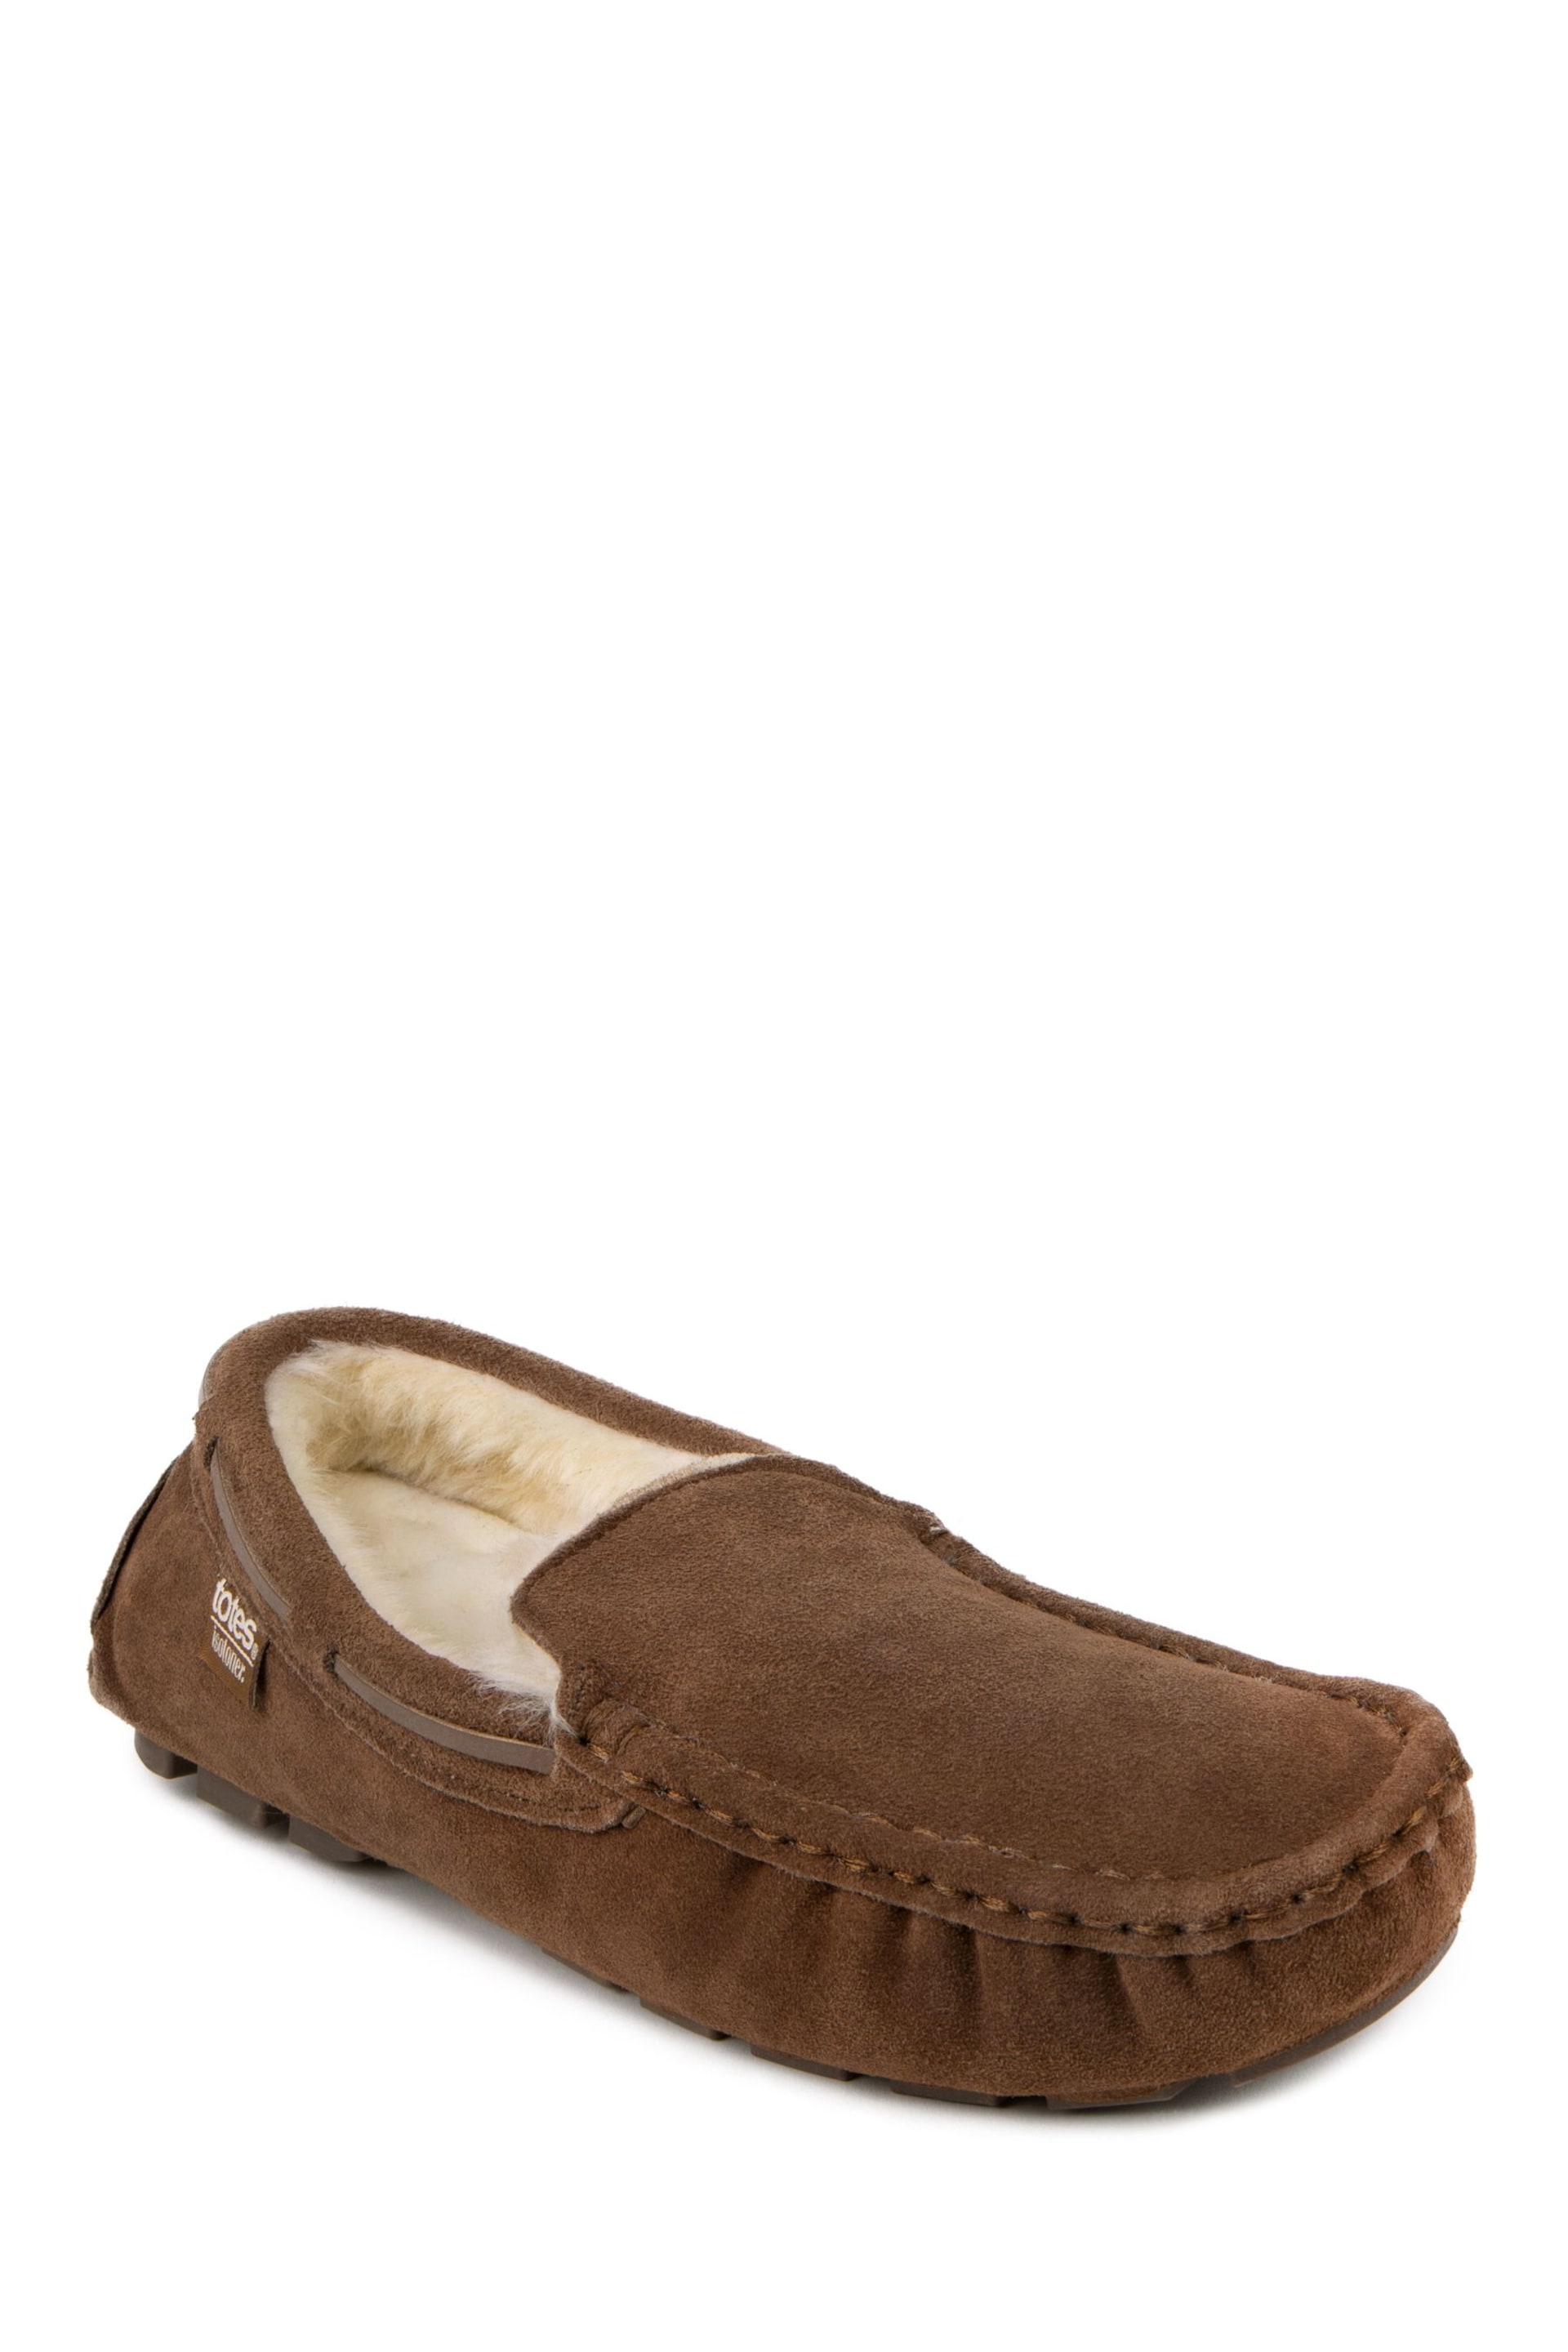 Totes Brown Mens Isotoner Real Suede With Closed Stitch Moccasin Slippers - Image 3 of 5